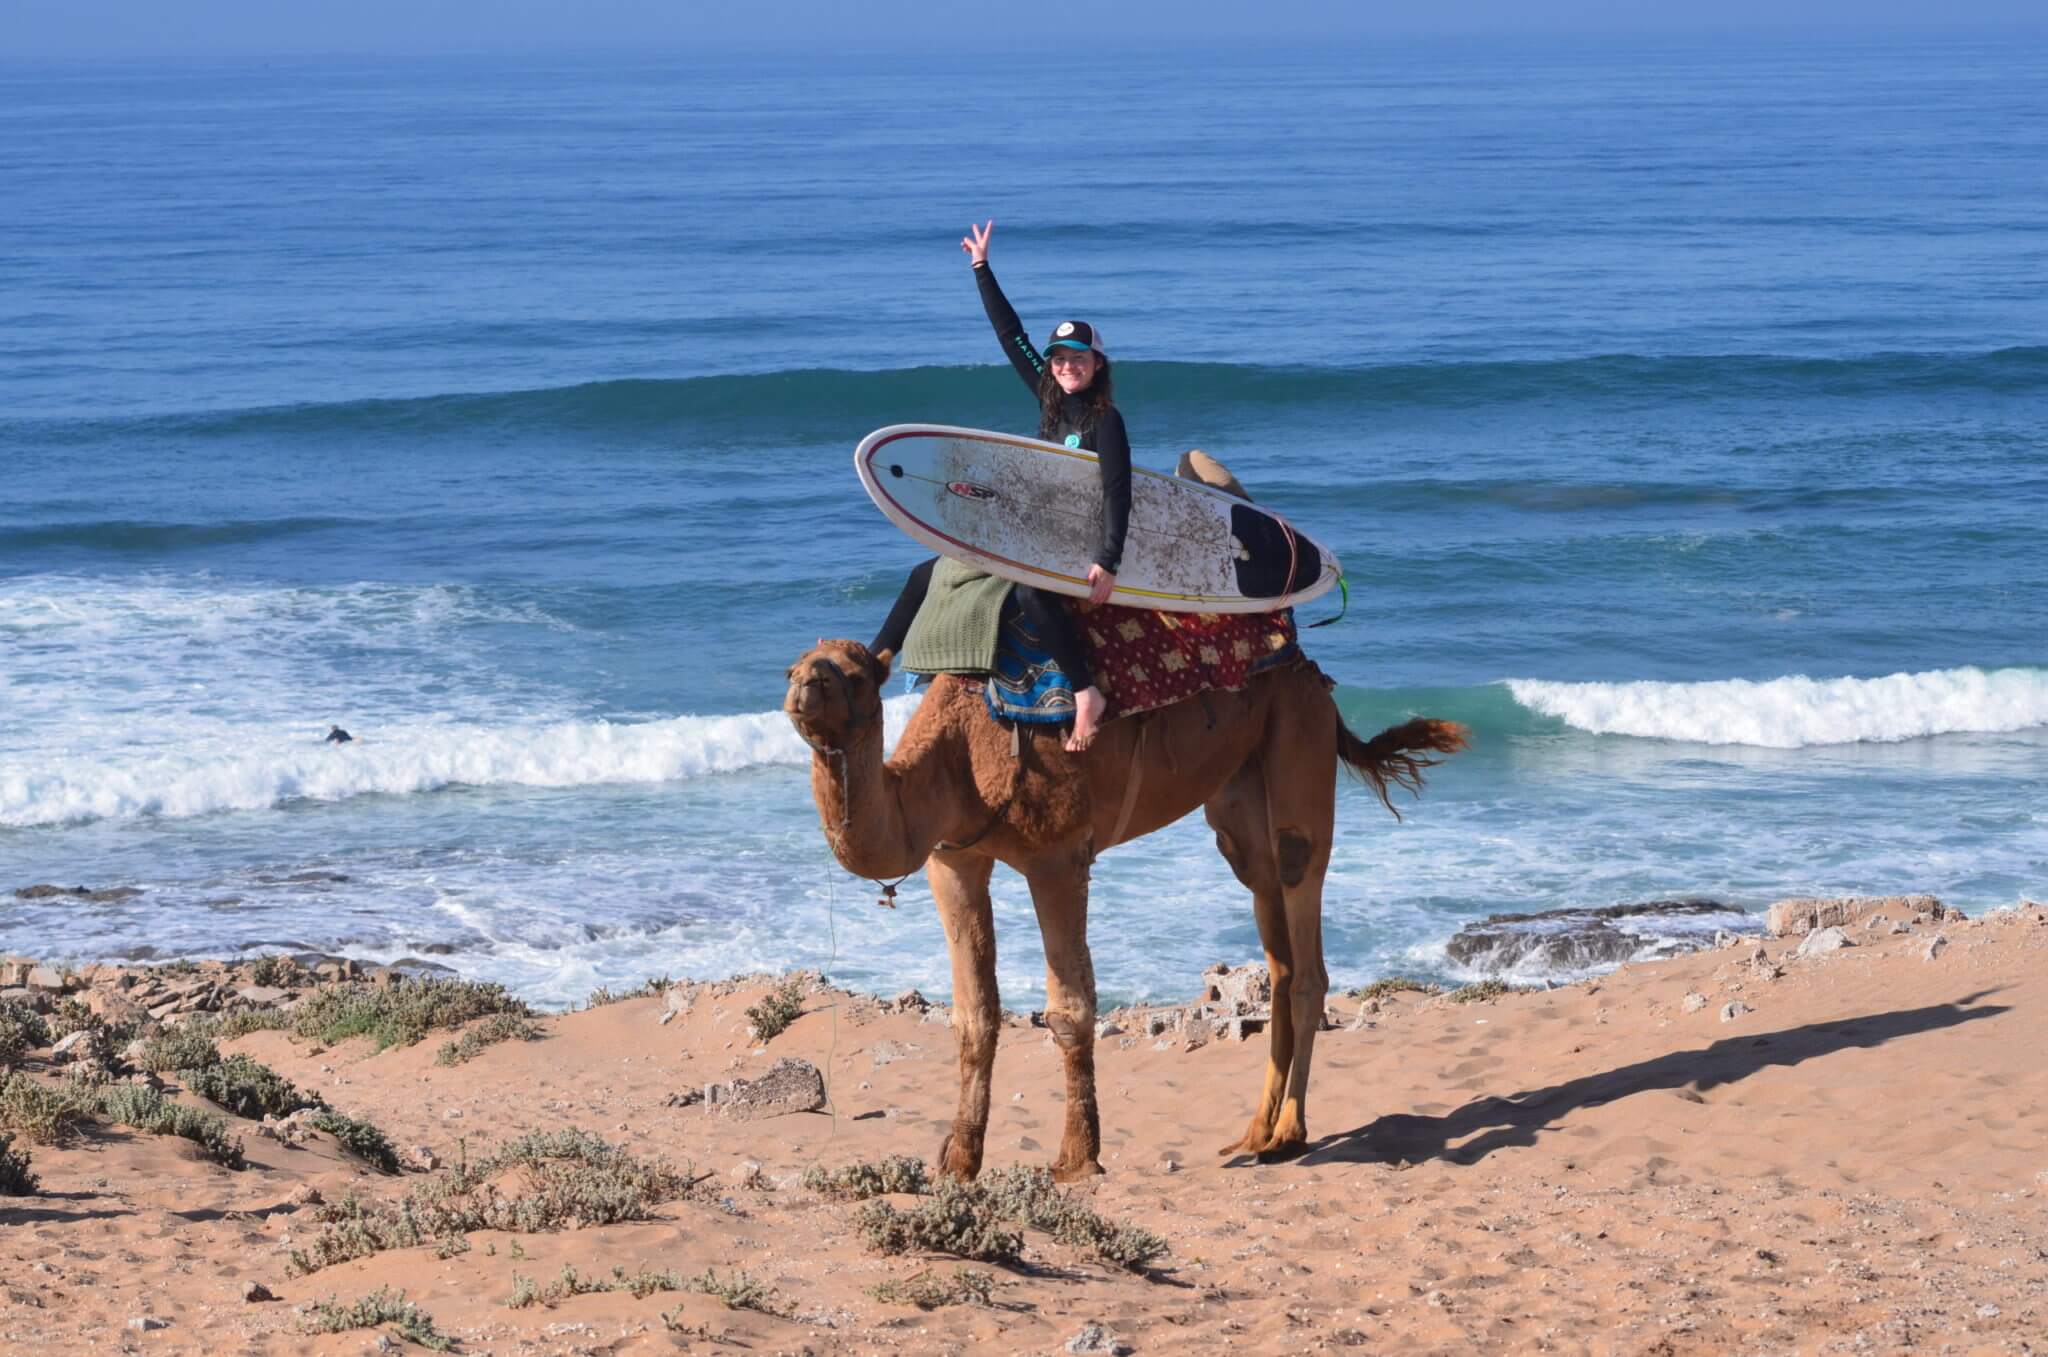 Morocco has a plethora of surf camps